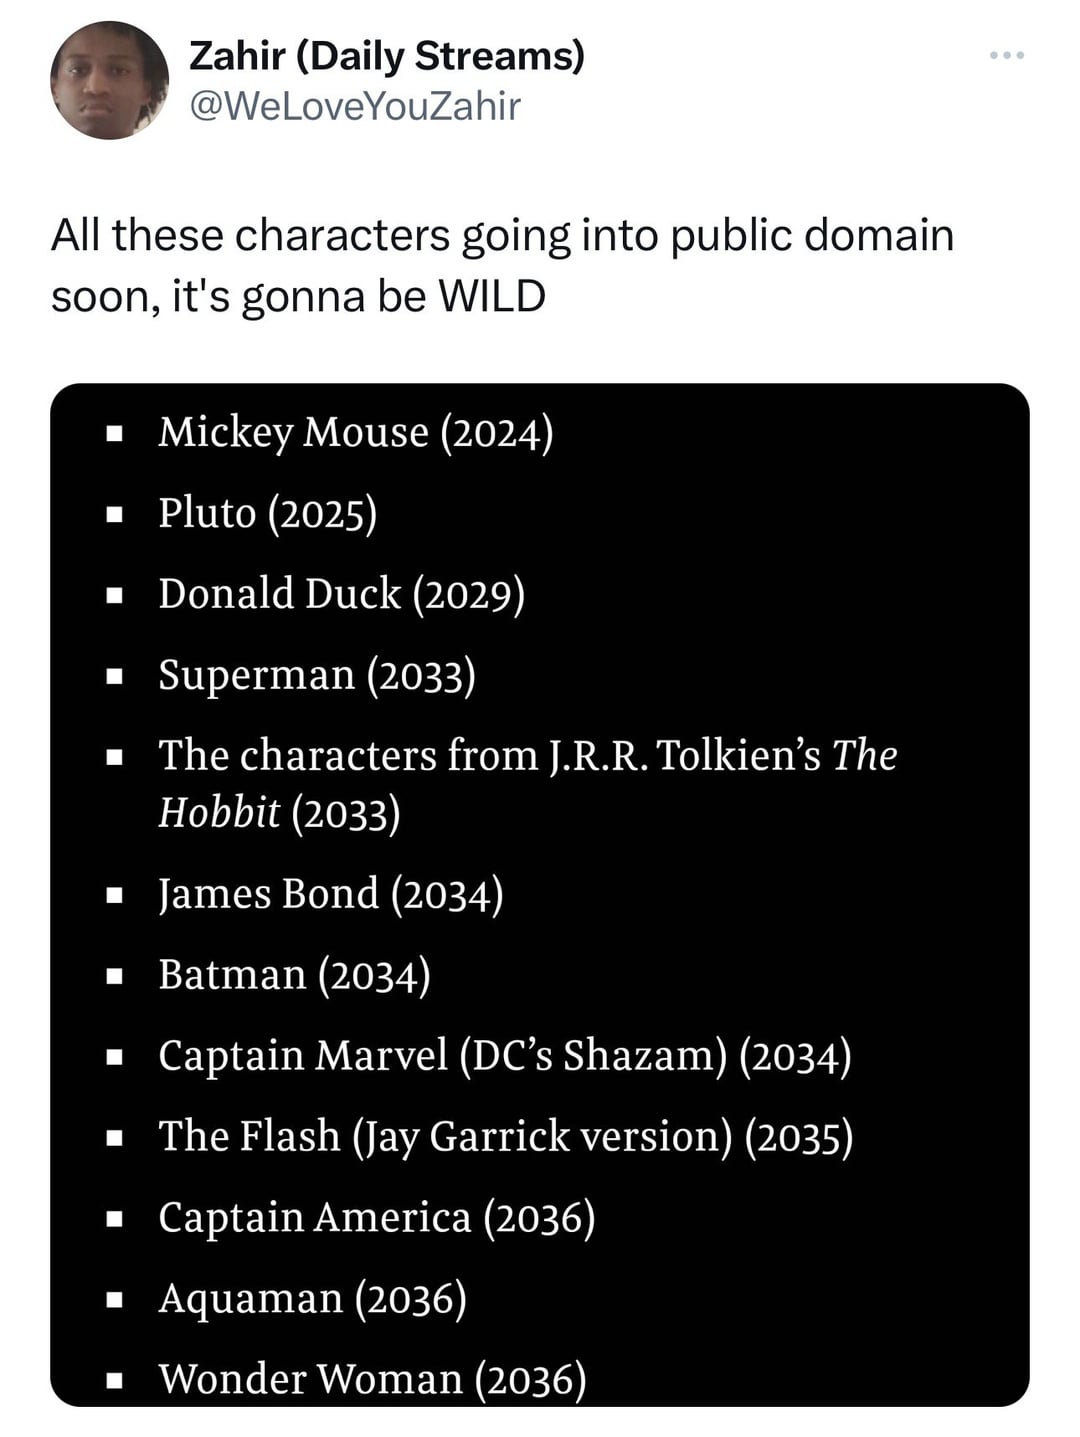 angle - All these characters going into public domain soon, it's gonna be Wild Zahir Daily Streams Mickey Mouse 2024 Pluto 2025 Donald Duck 2029 Superman 2033 The characters from J.R.R. Tolkien's The Hobbit 2033 James Bond 2034 Batman 2034 Captain Marvel 